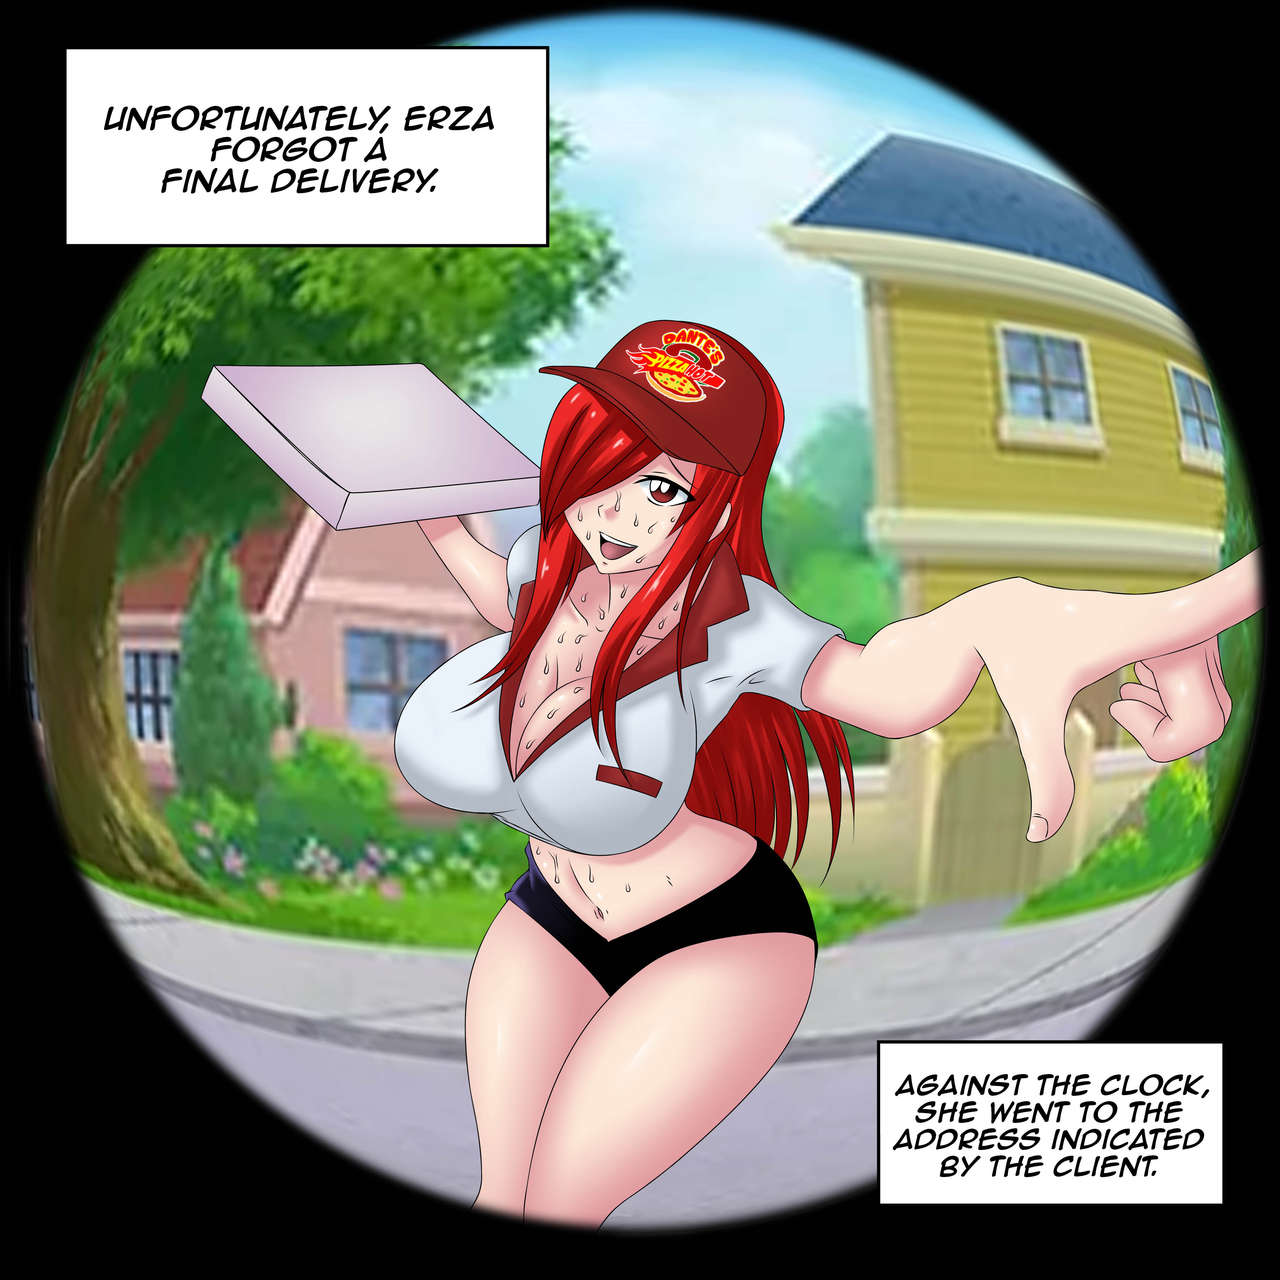 Pizza Delivery Service By Erza Scarlet 07